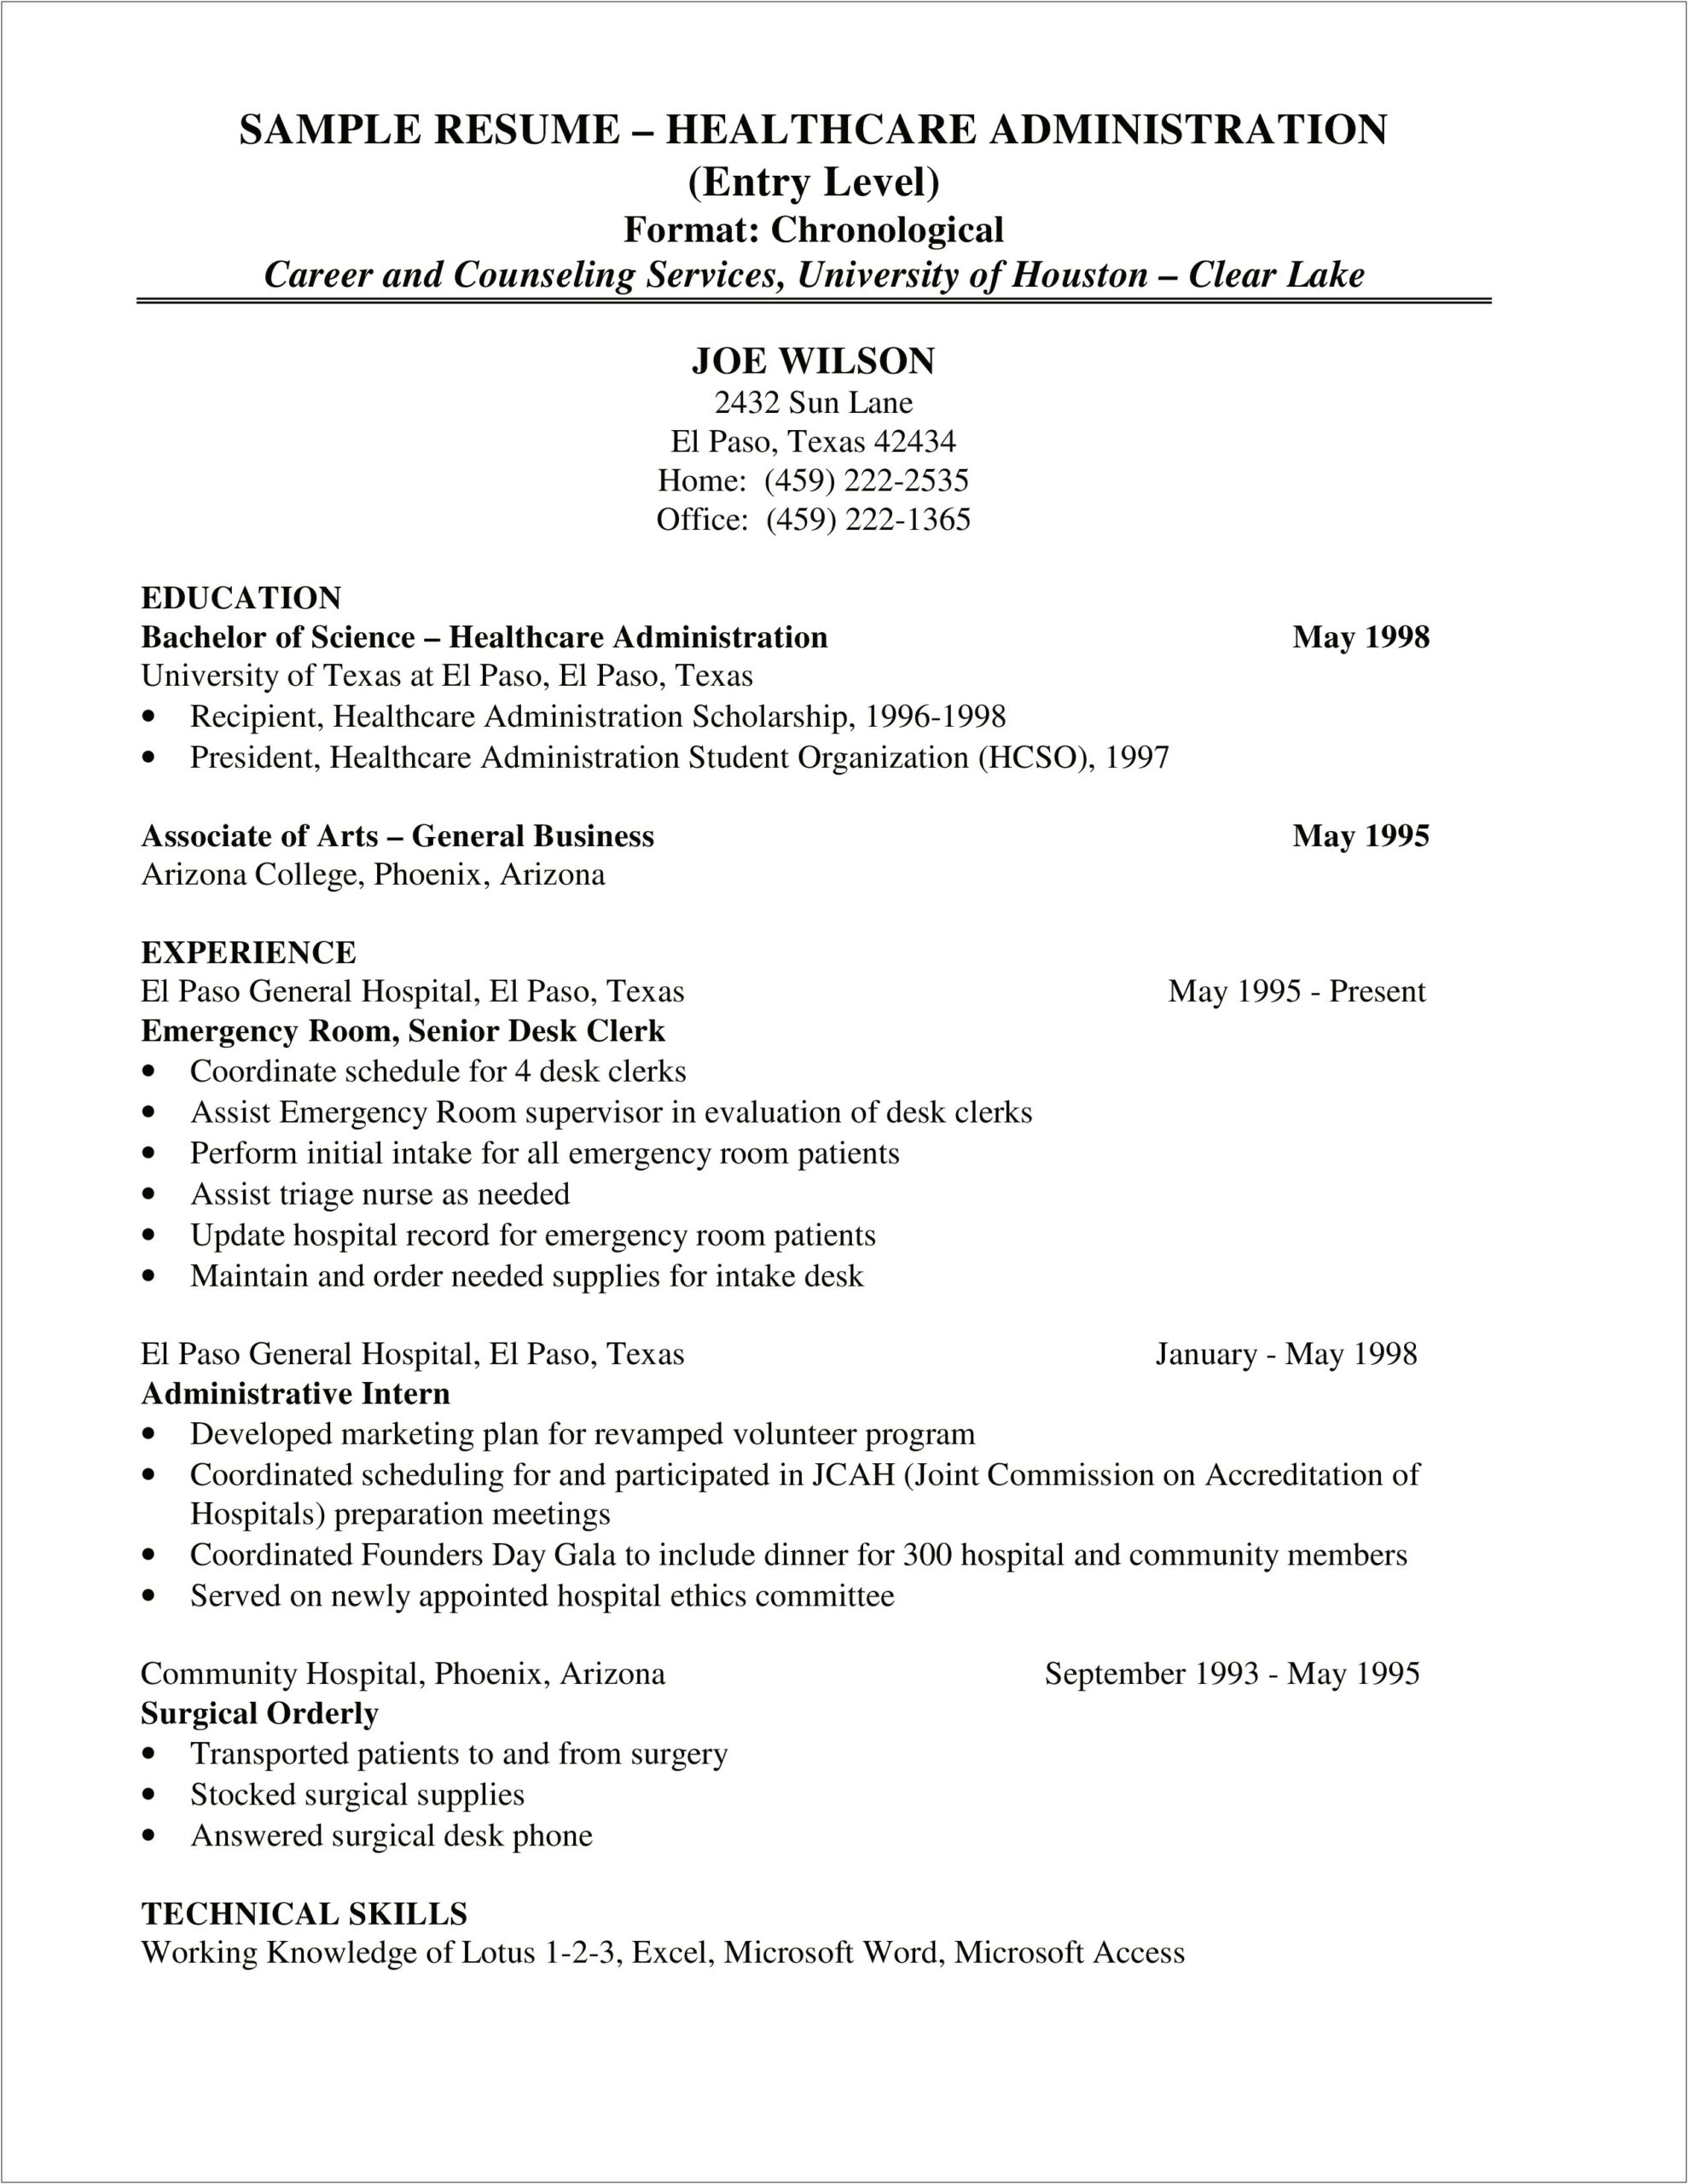 Resume For Healthcare Administration With No Experience